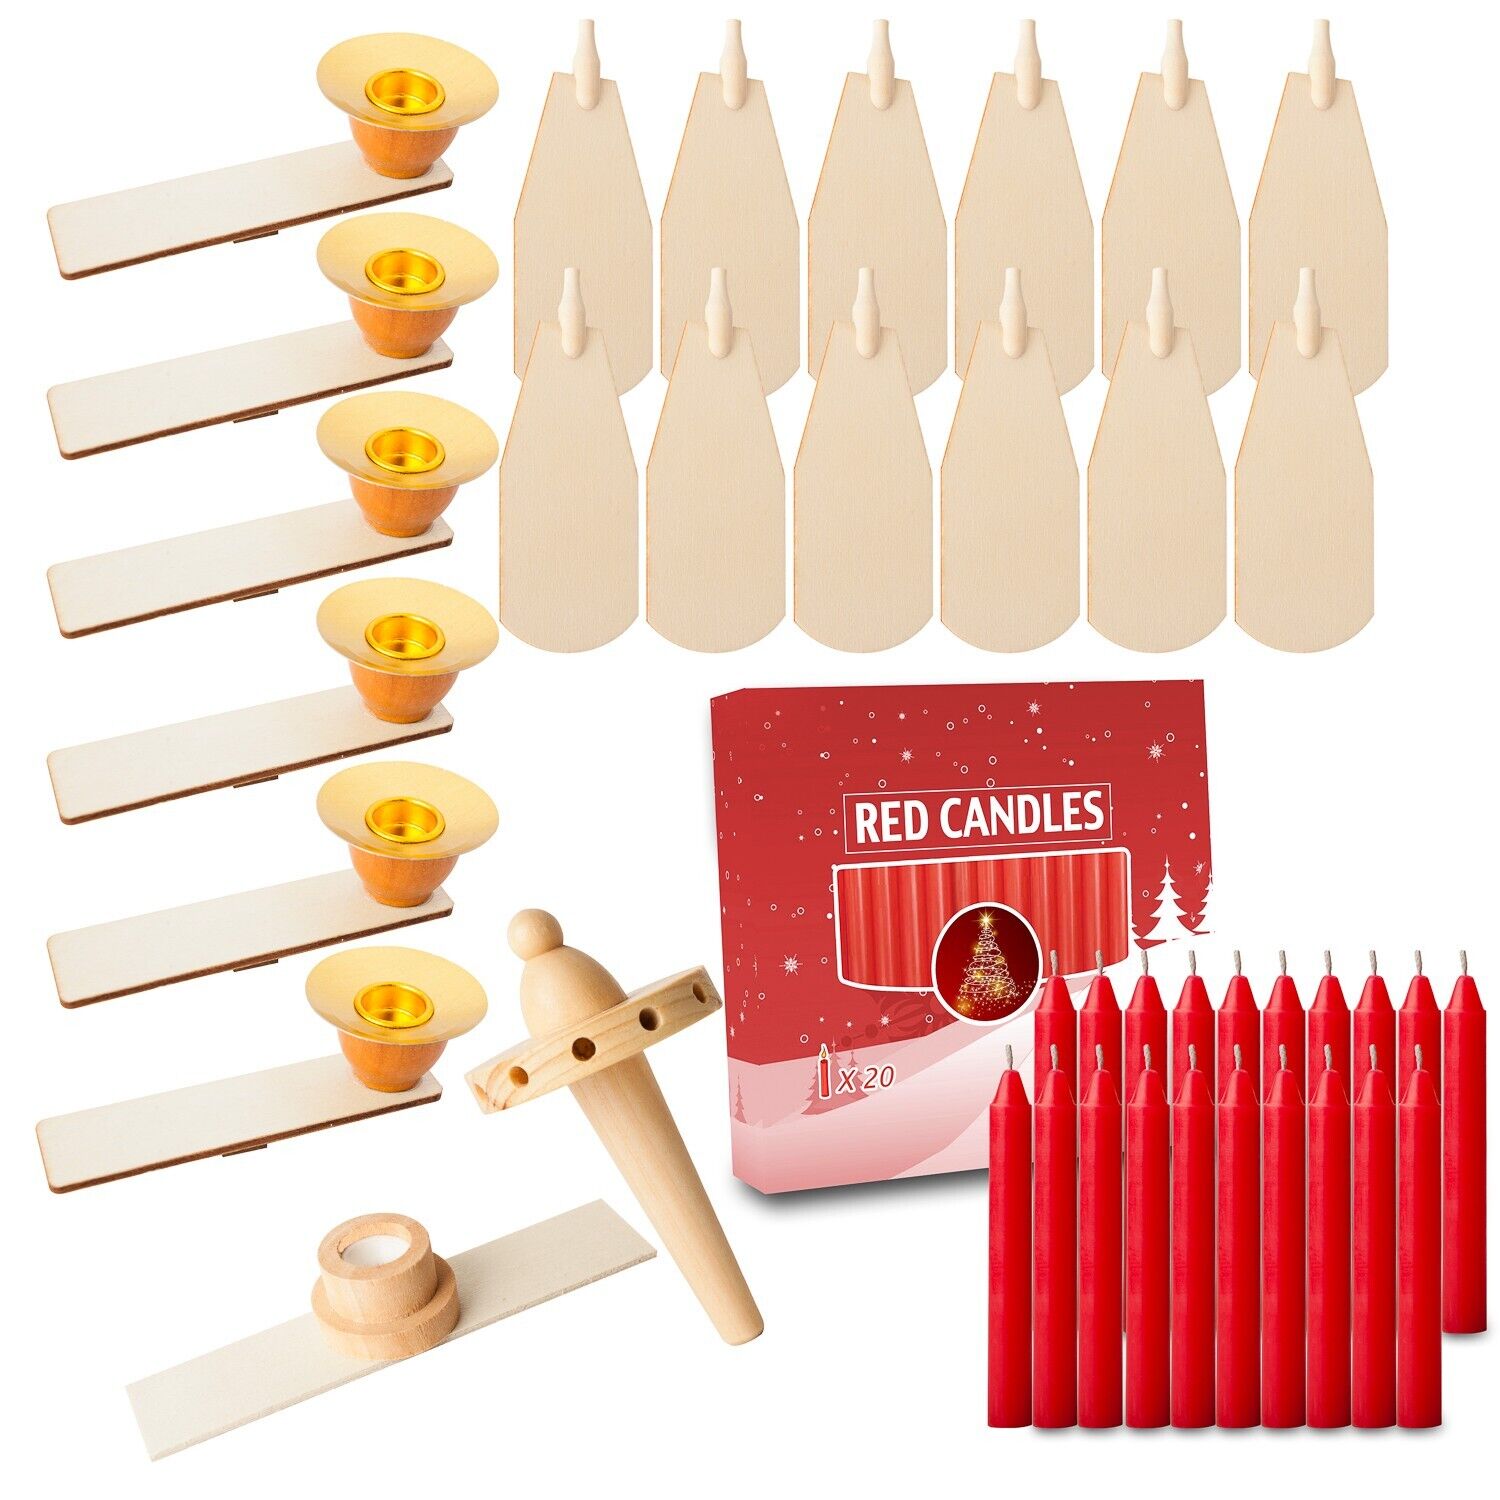 21 pc Parts Replacement Kit for Christmas Pyramid -Windmill With 20 Red Candles